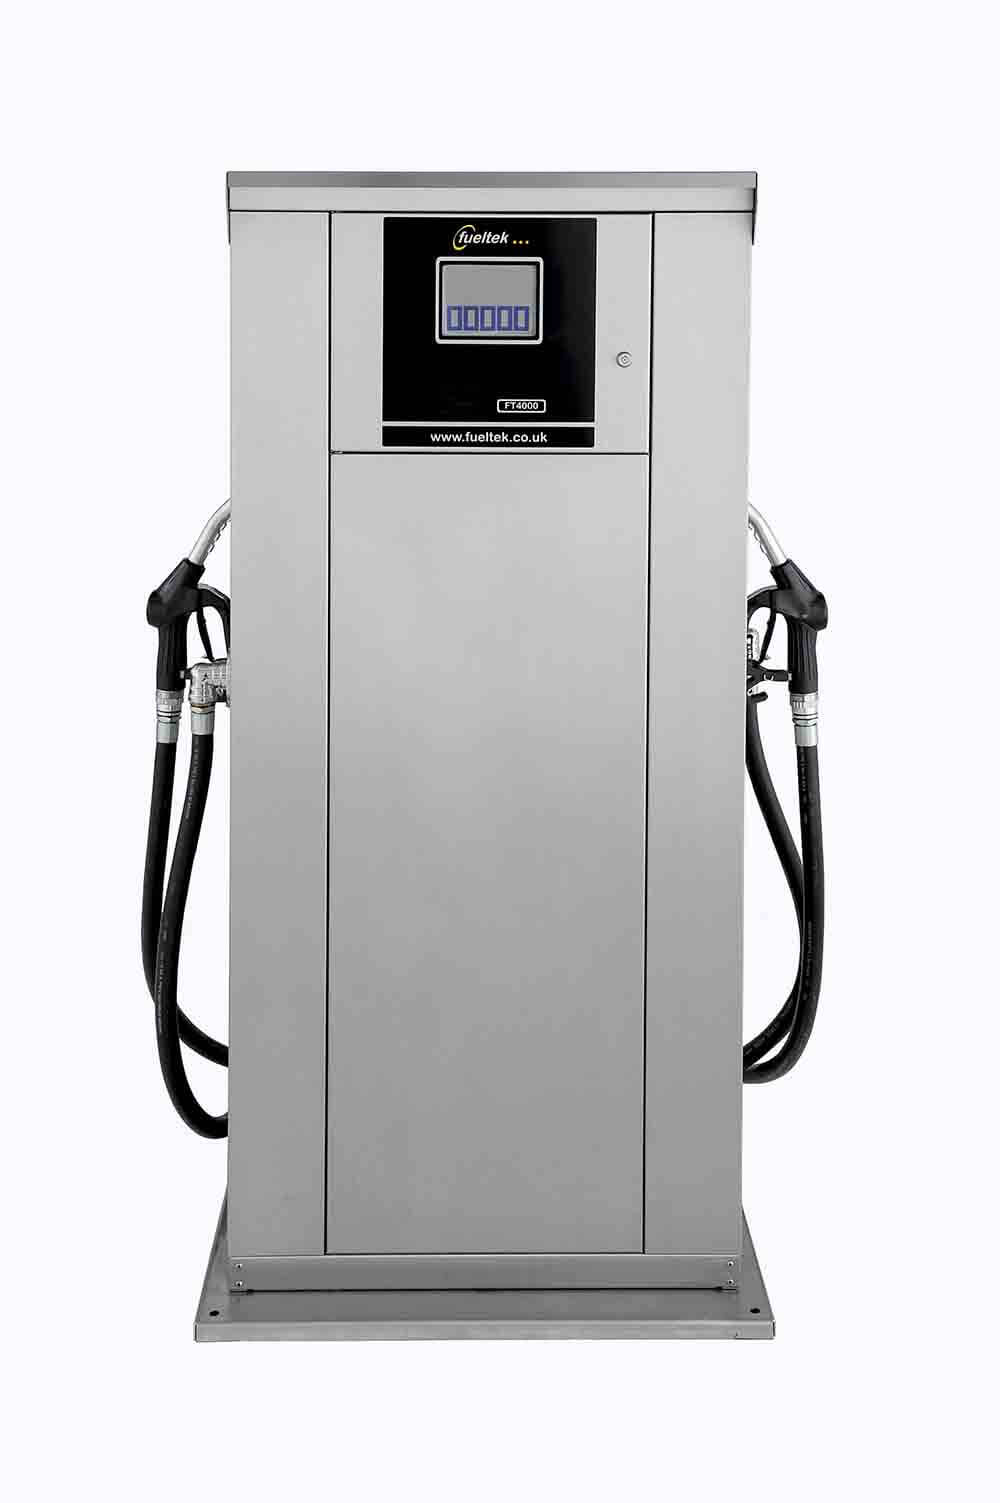 Designers of Pulsed Output Fuel Pump UK